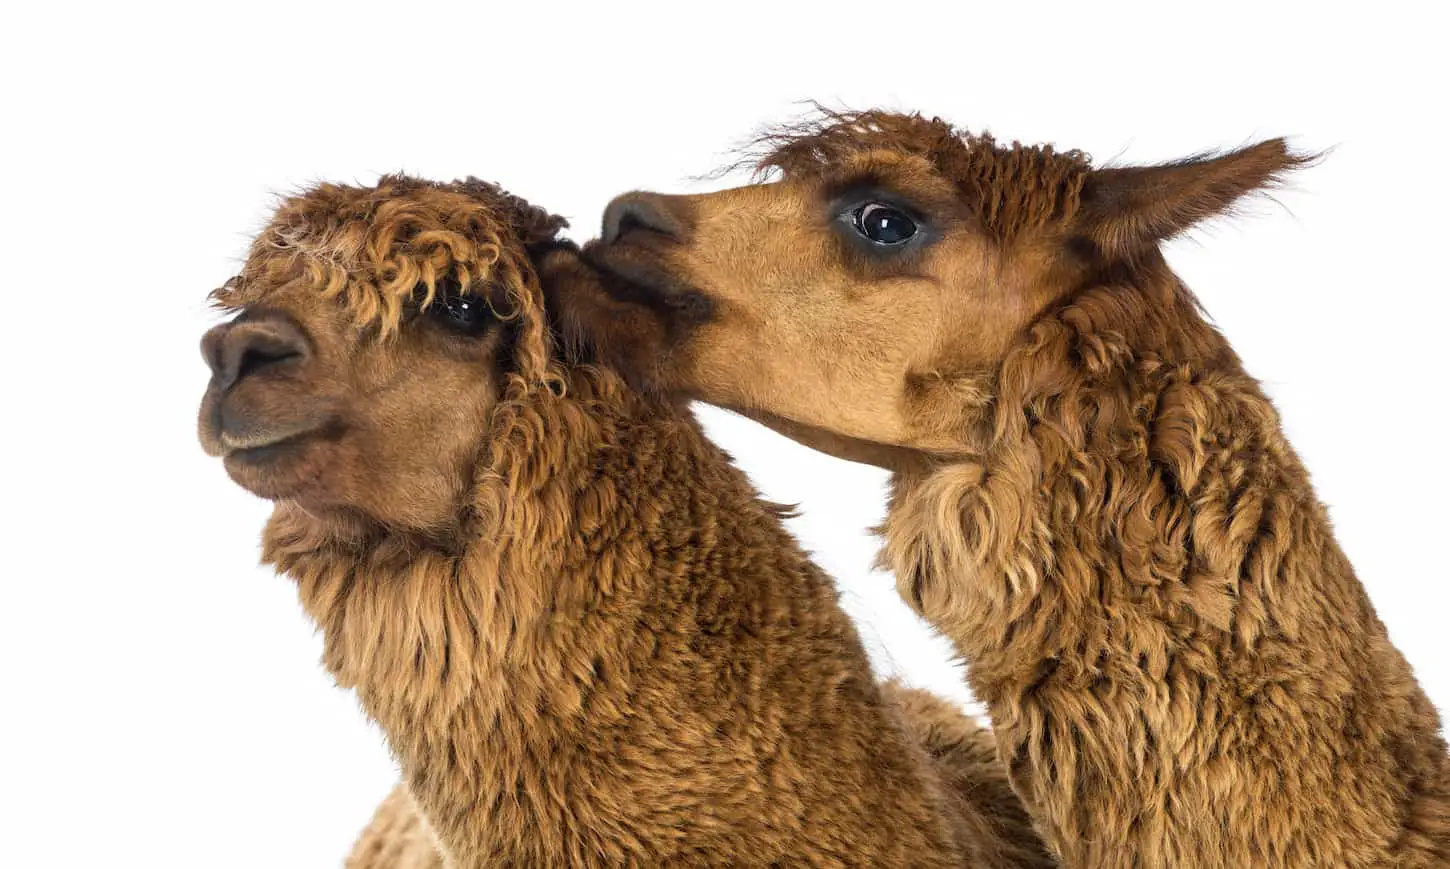 An image of an alpaca biting another alpaca's ear against white background.